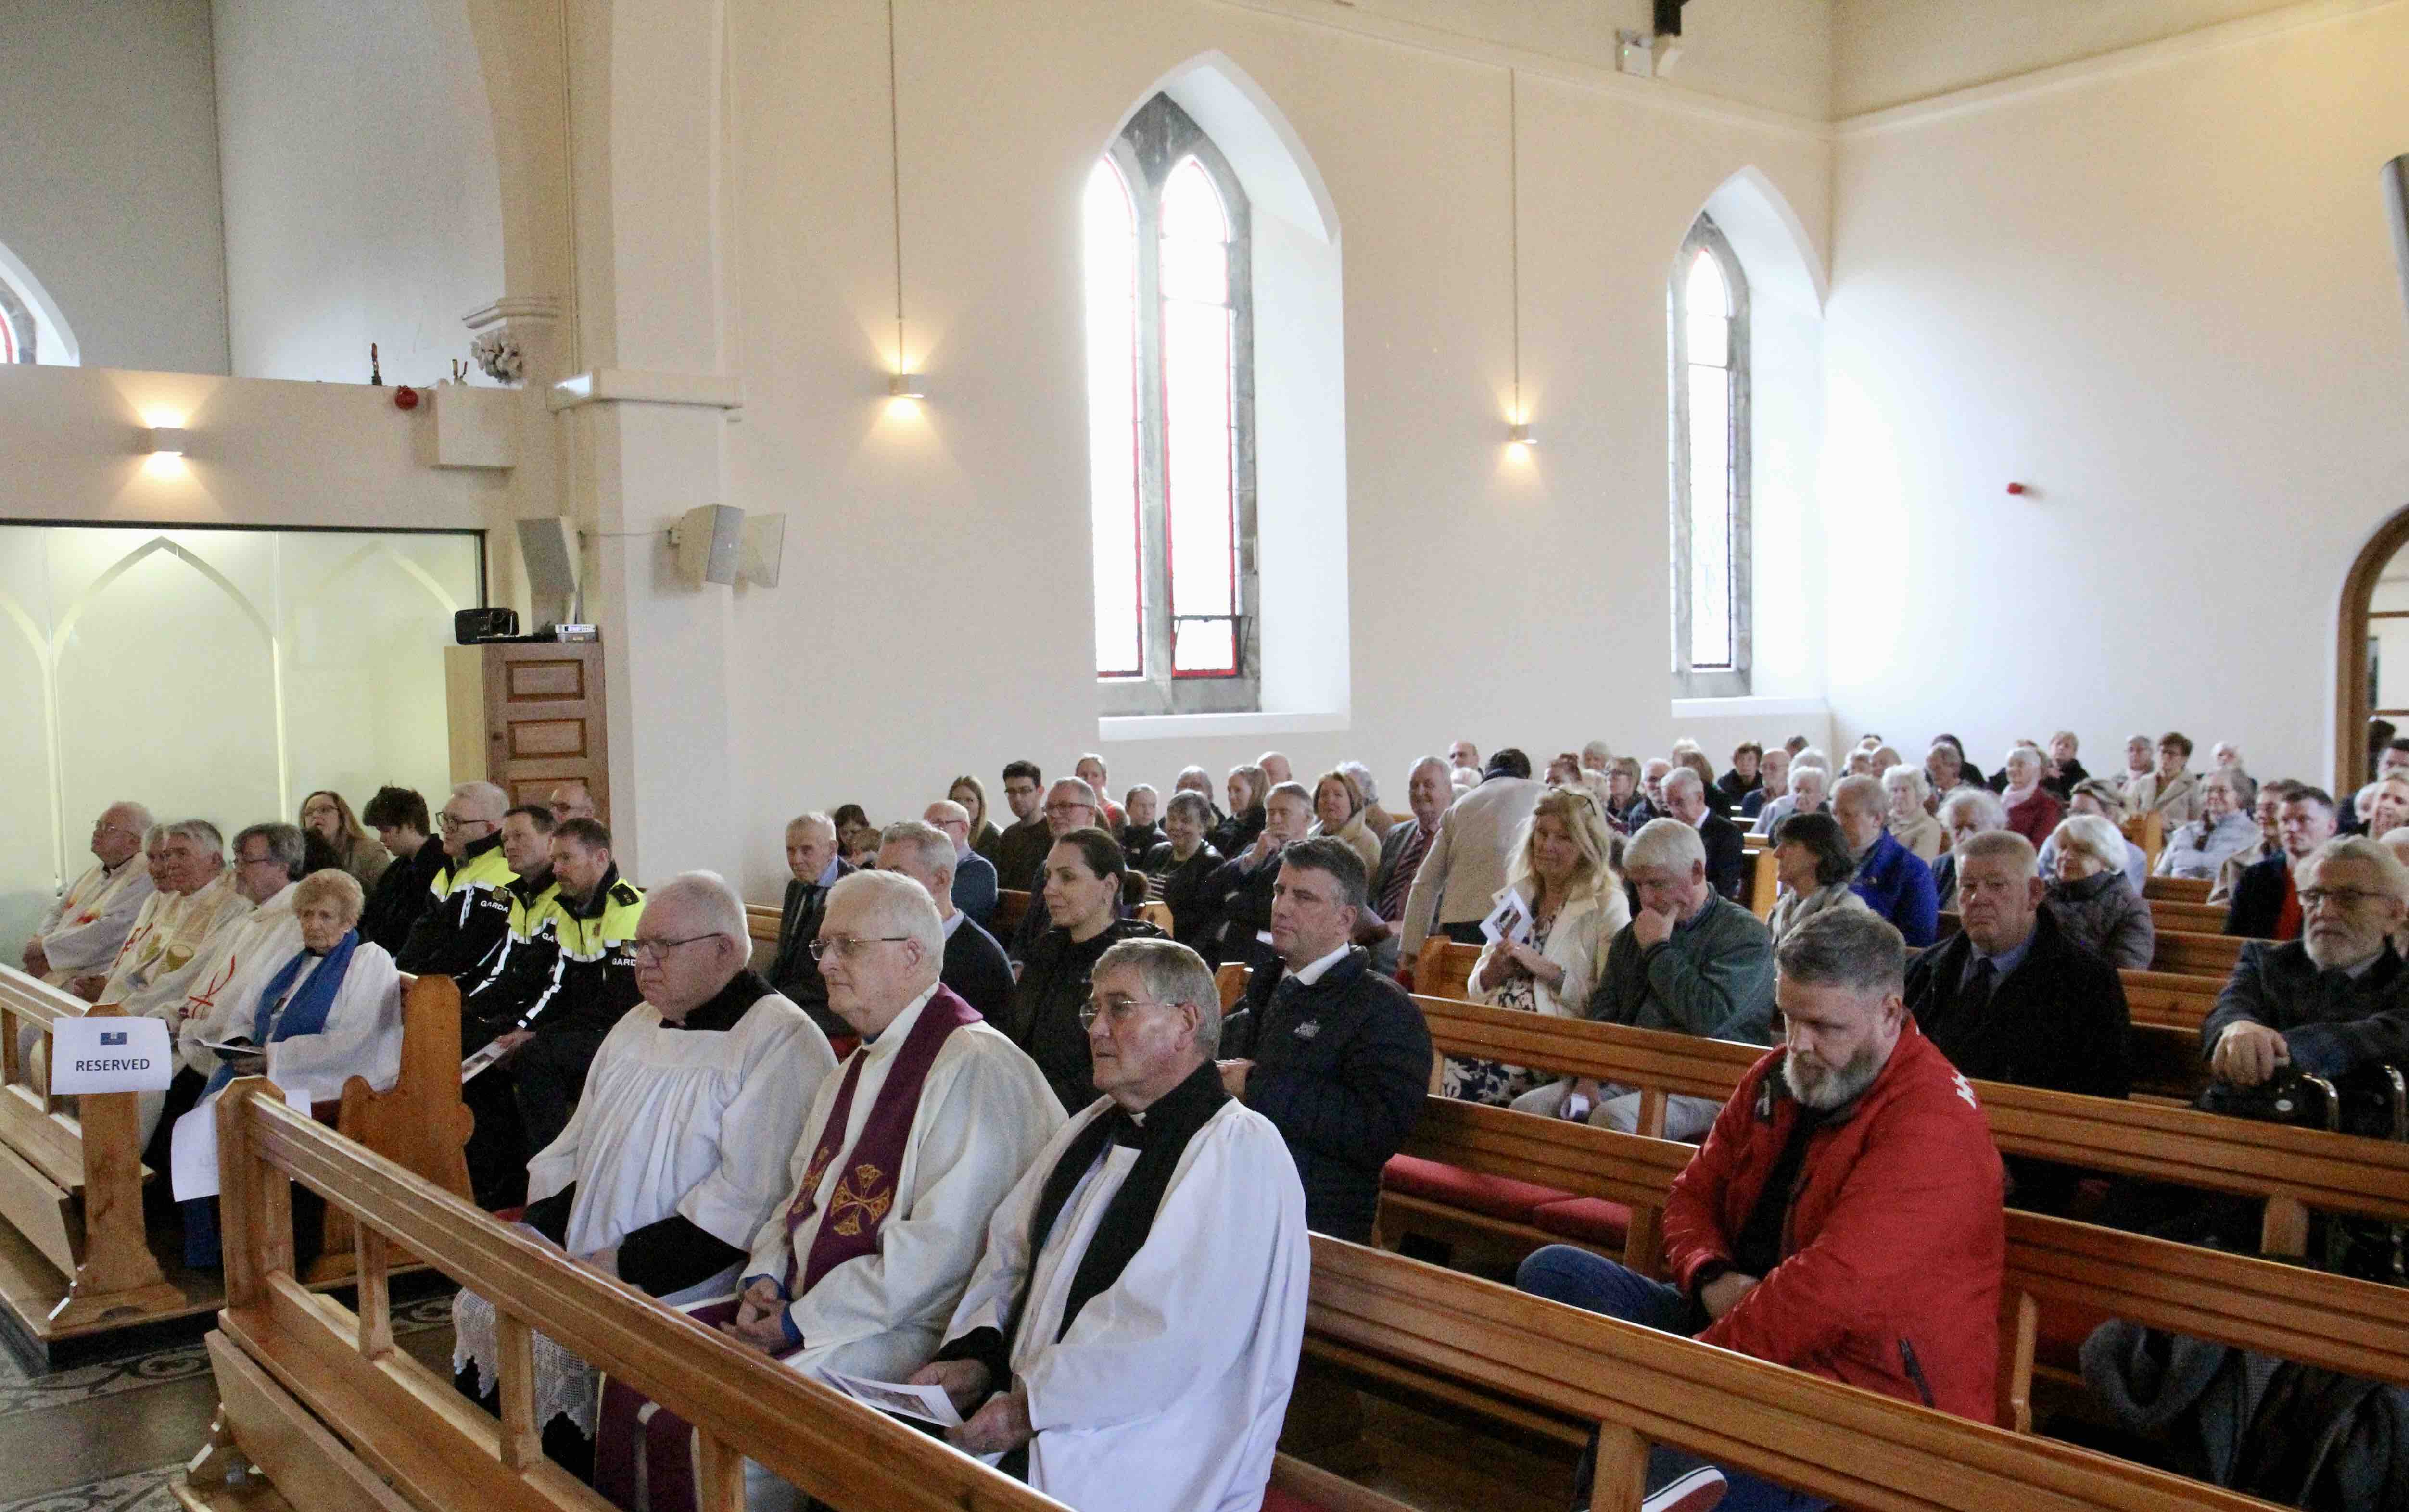 A section of the congregation.